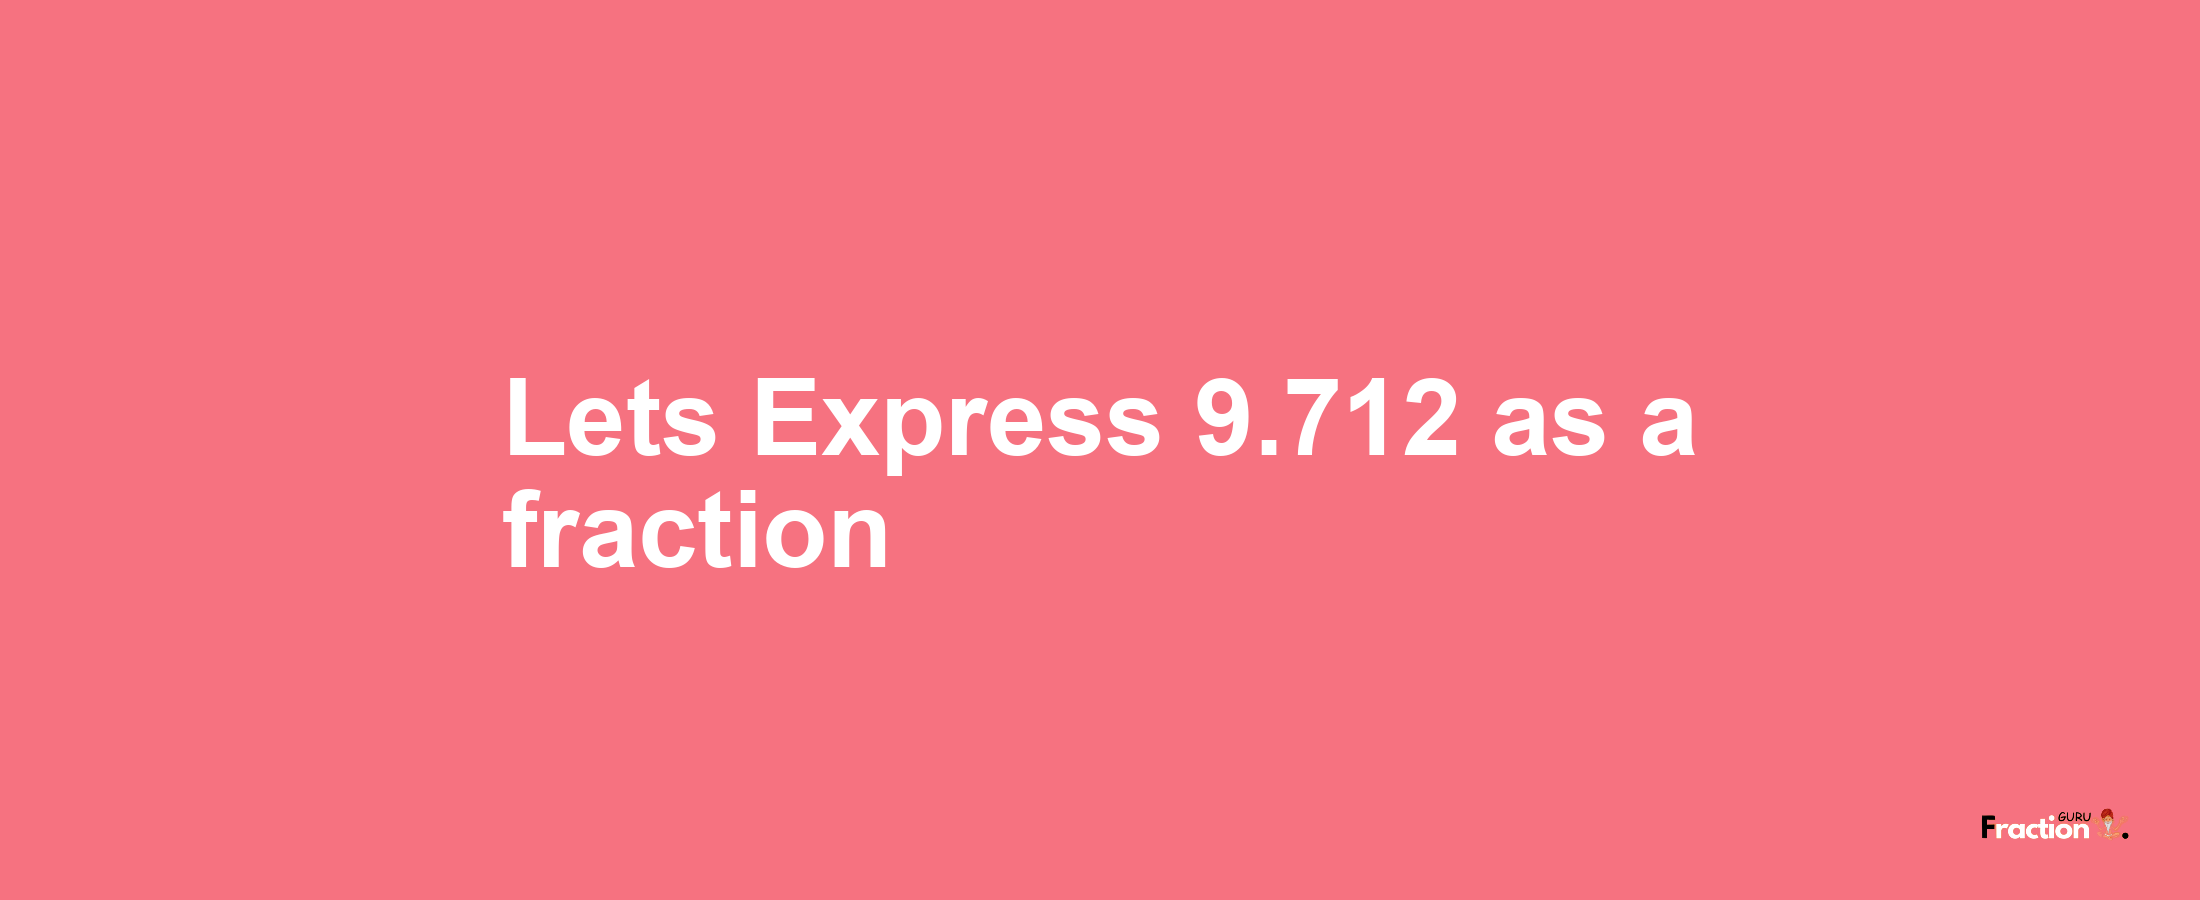 Lets Express 9.712 as afraction